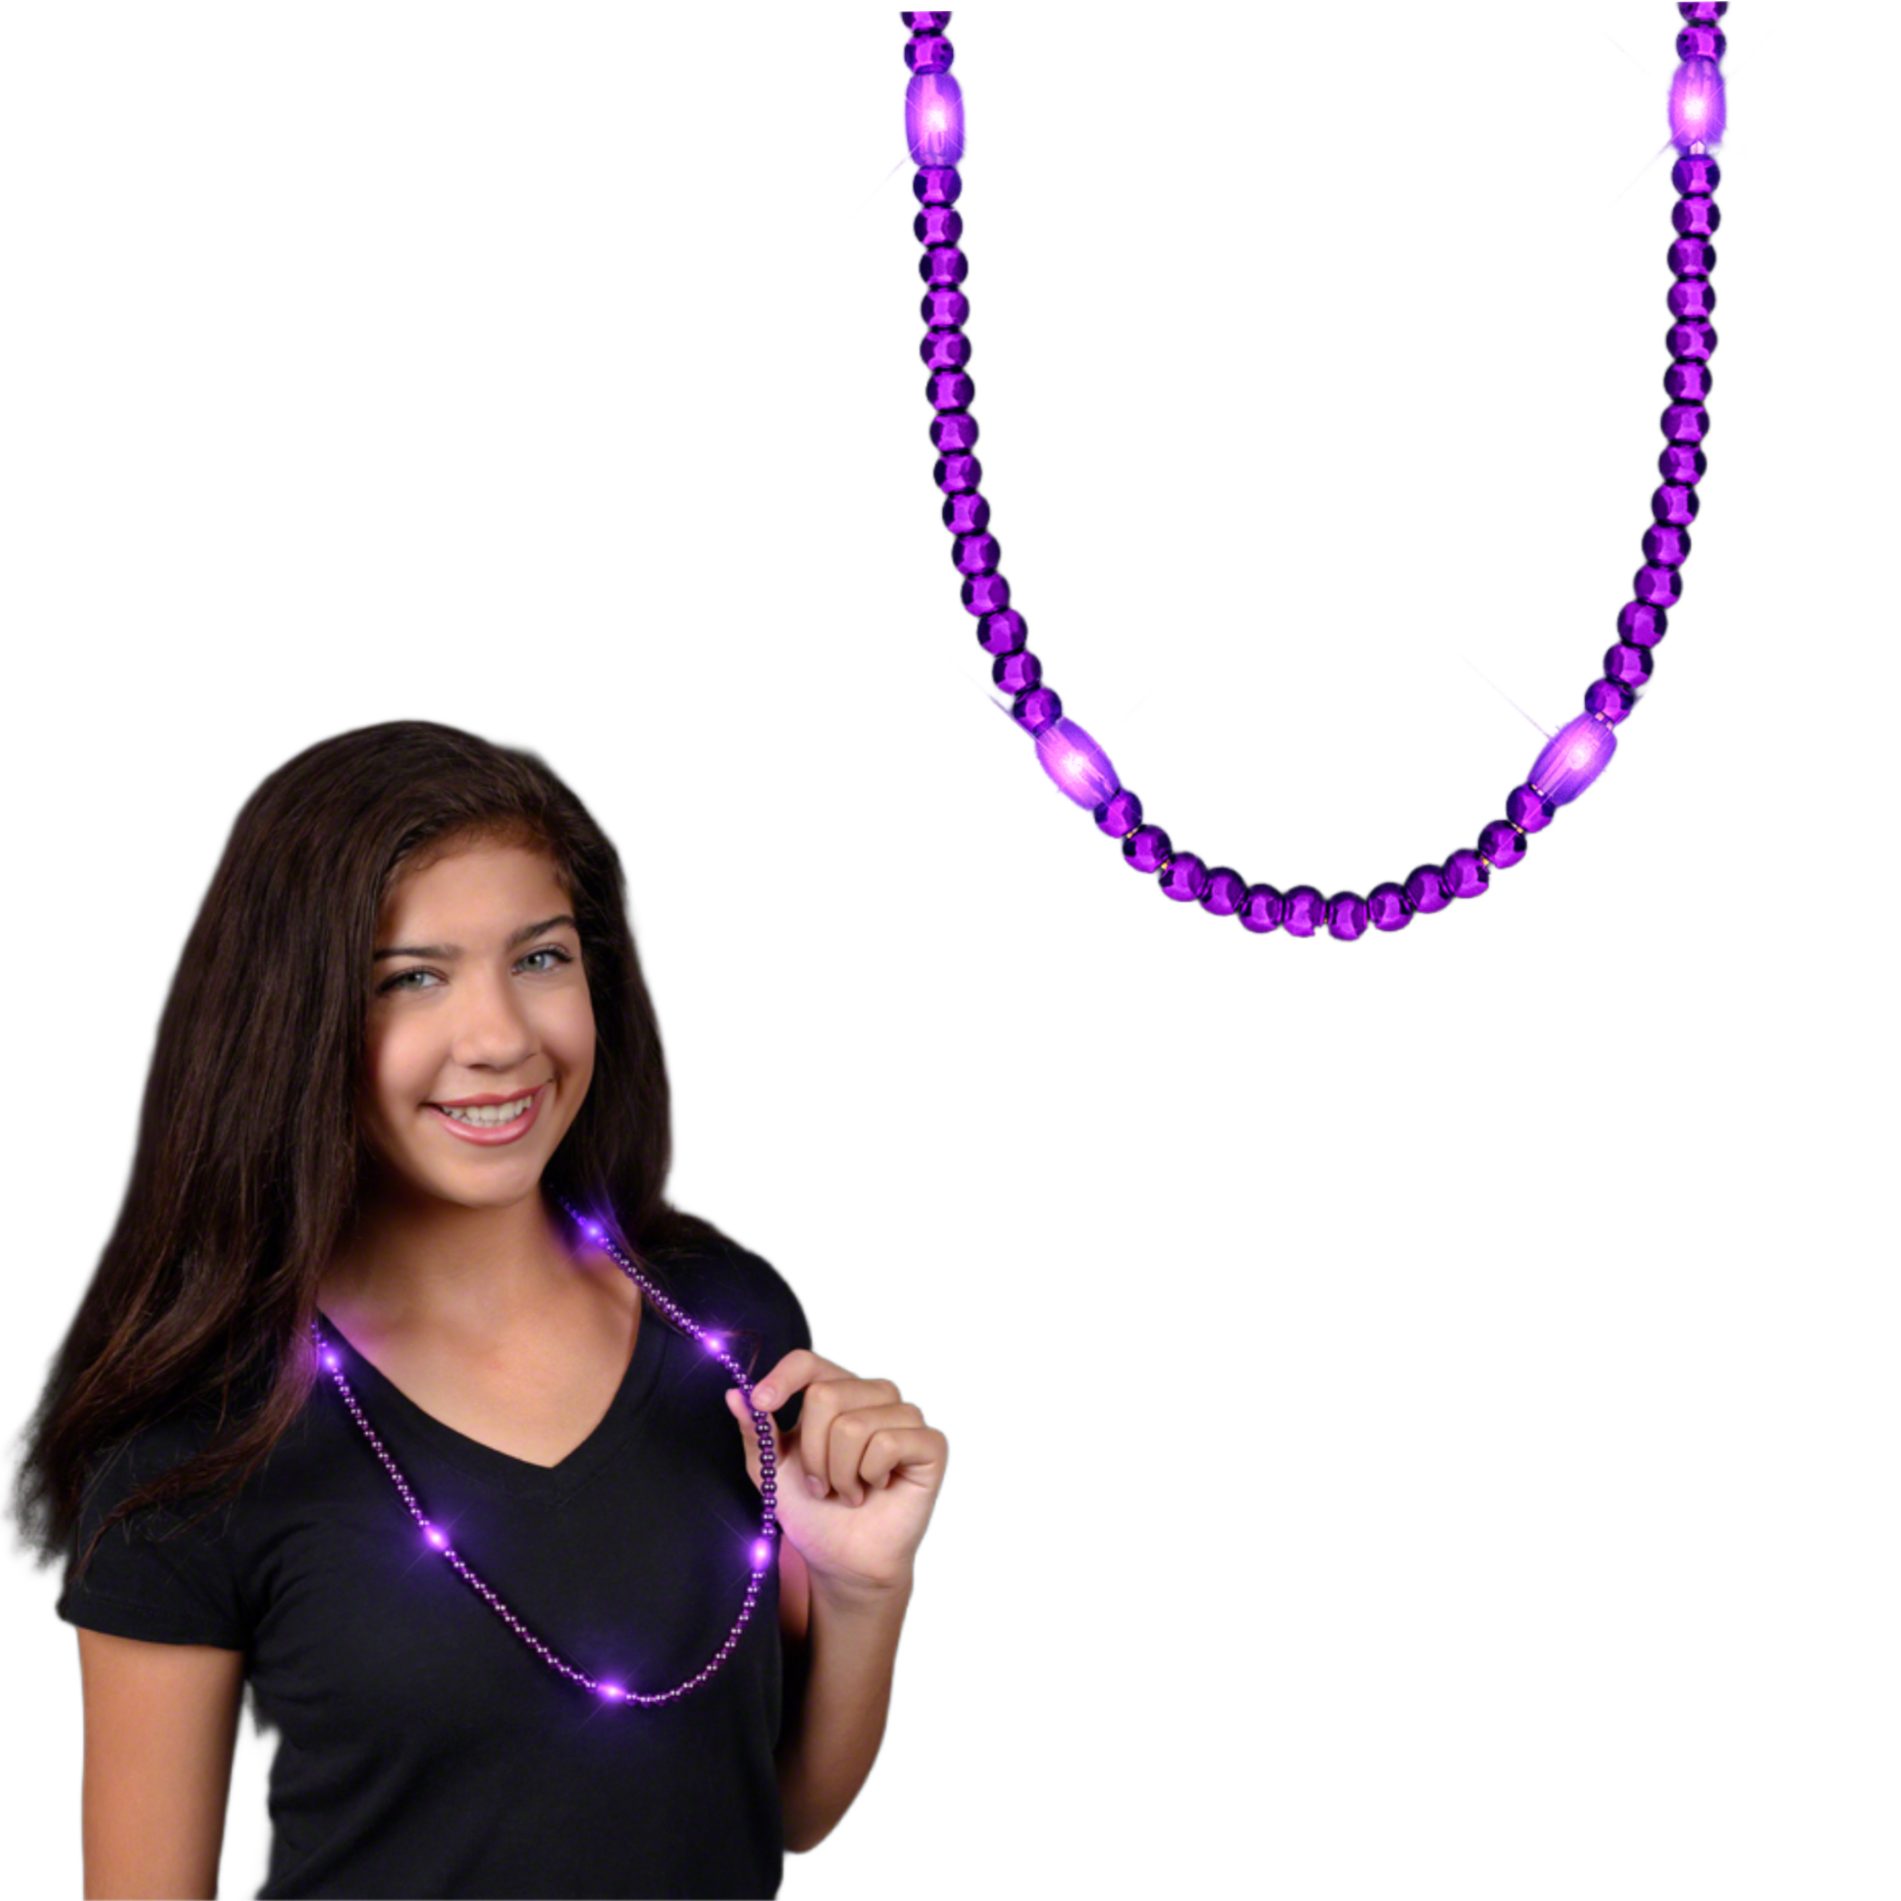 LED Necklace with Purple Metallic Beads for Mardi Gras All Products 6